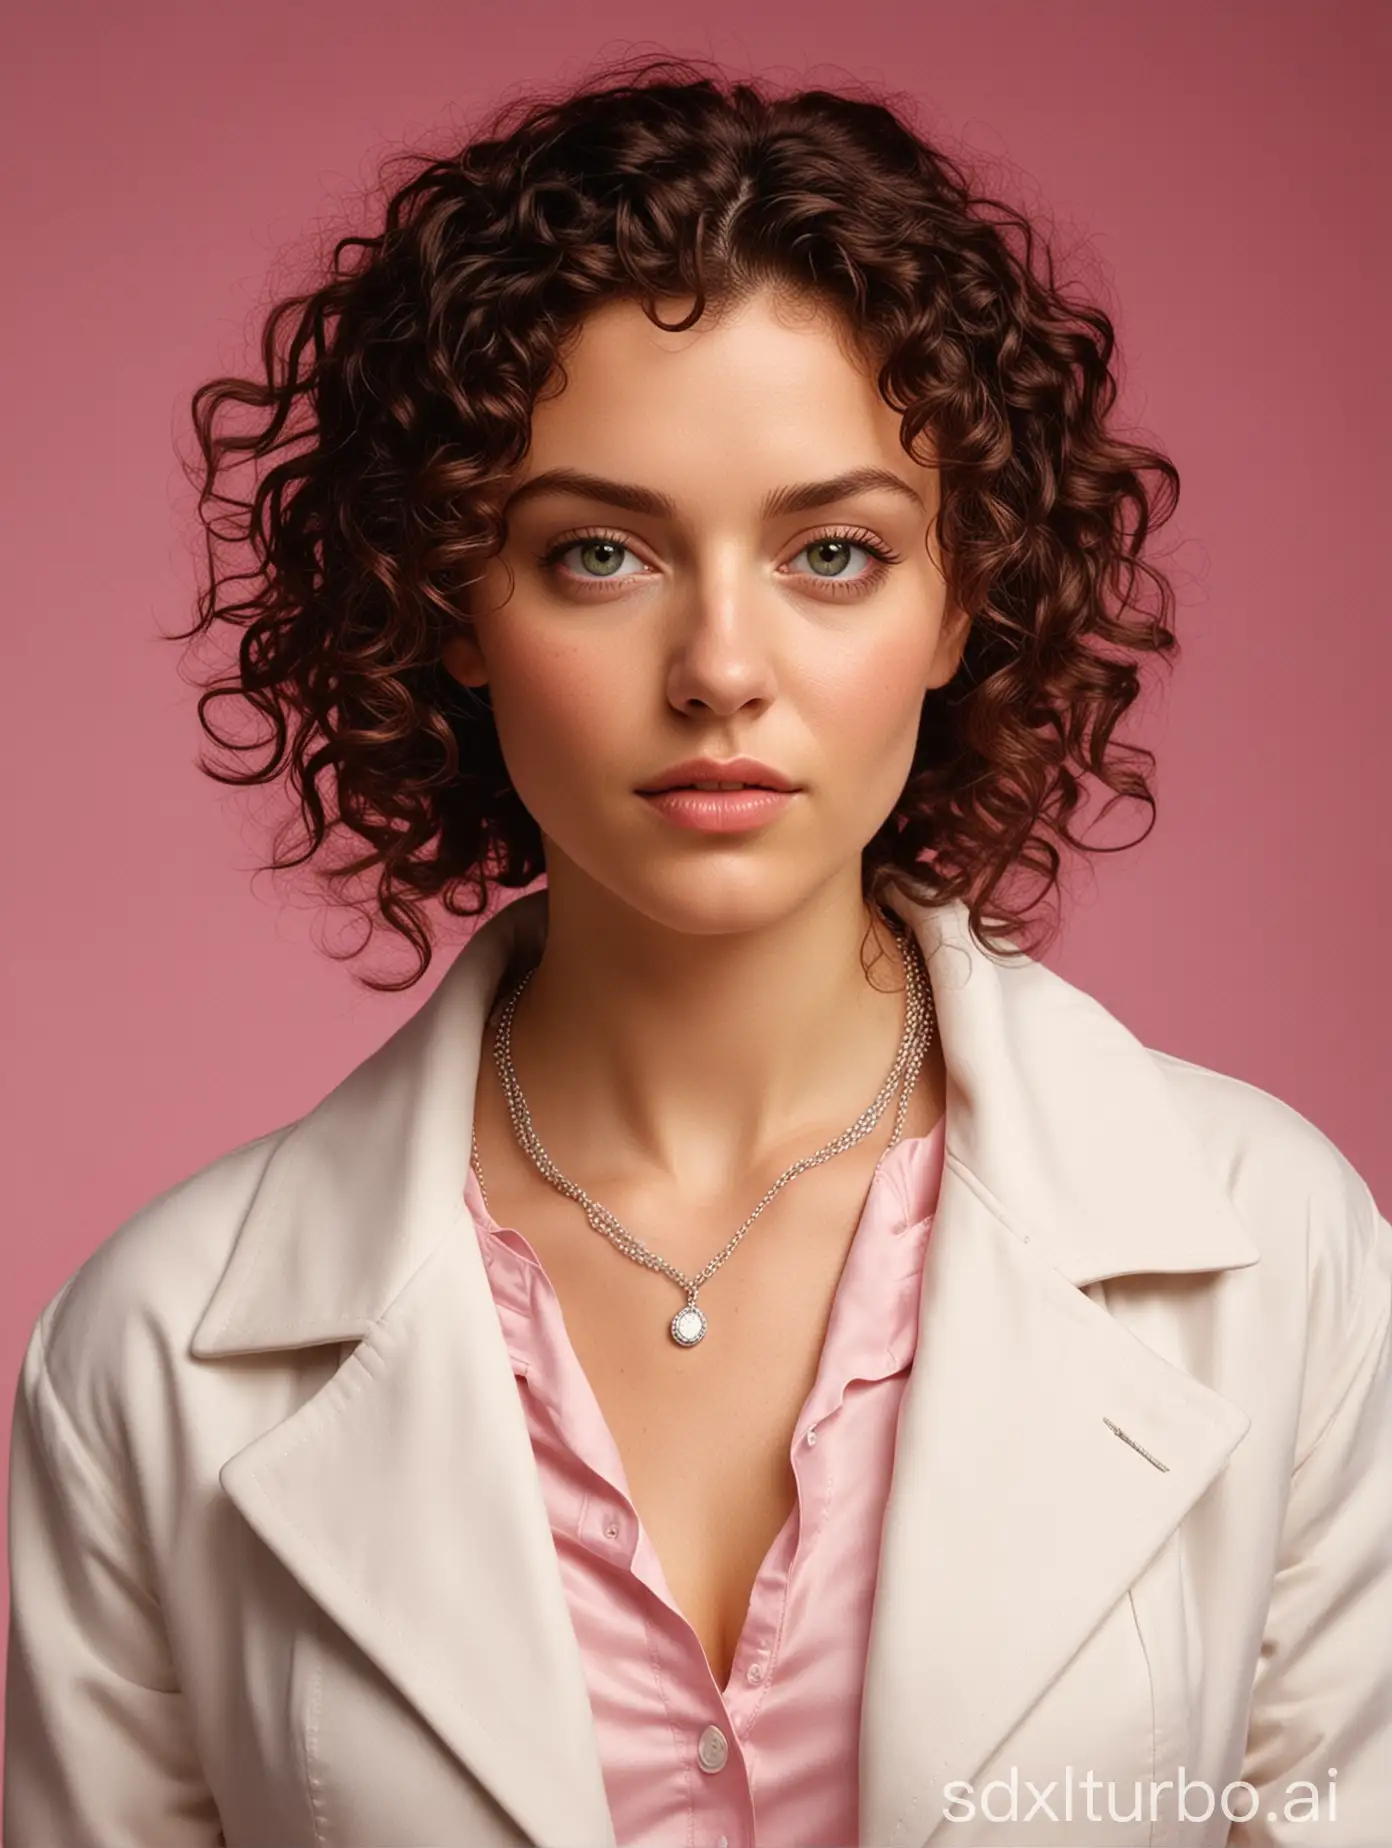 Stylish-Woman-Portrait-Curly-Haired-Beauty-in-White-Jacket-Against-Pink-Background